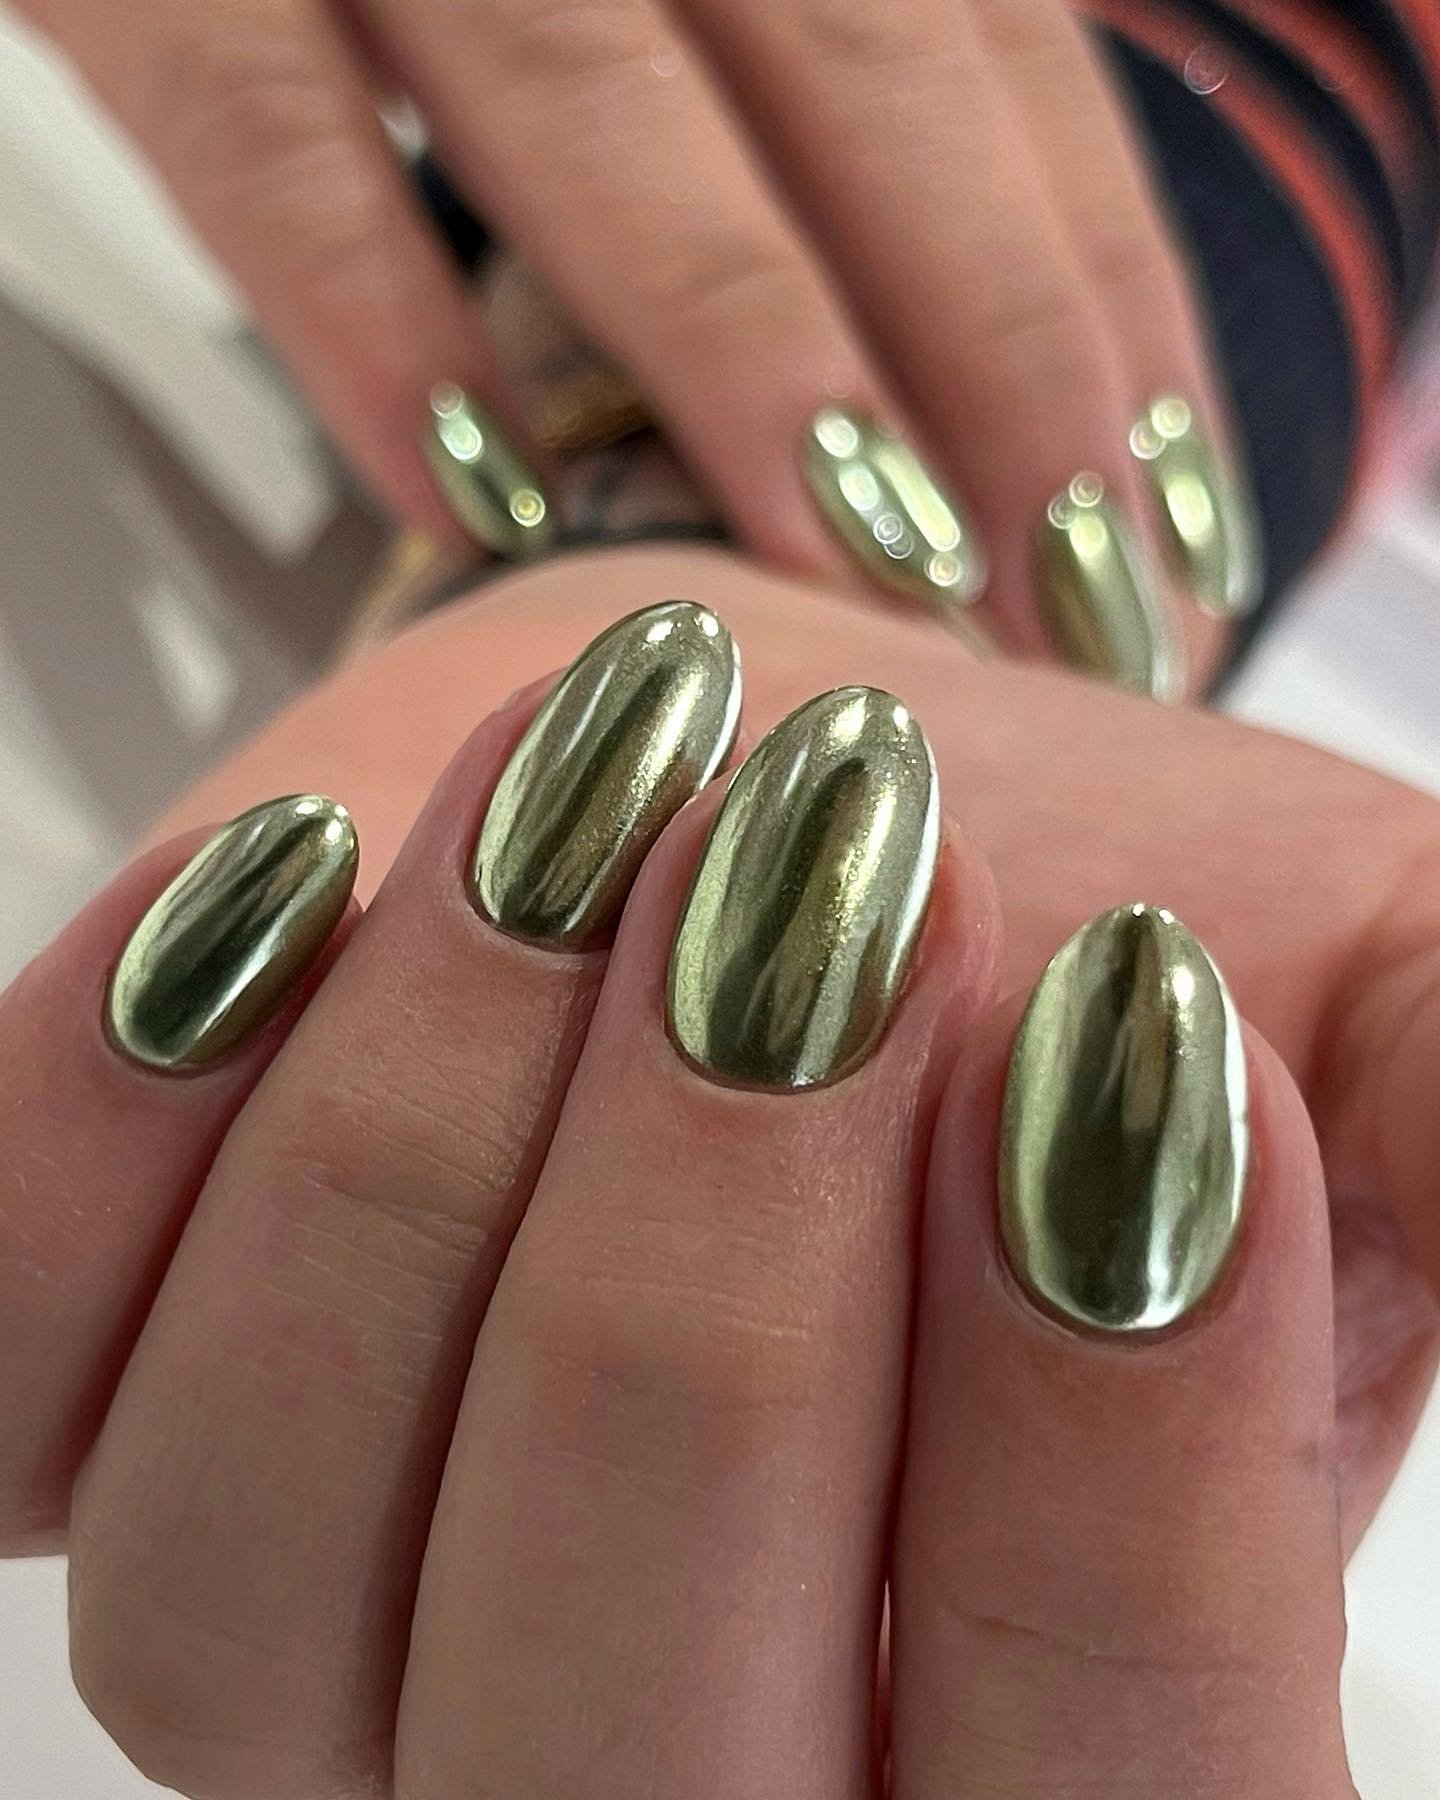 1 - Picture of Chrome Nails